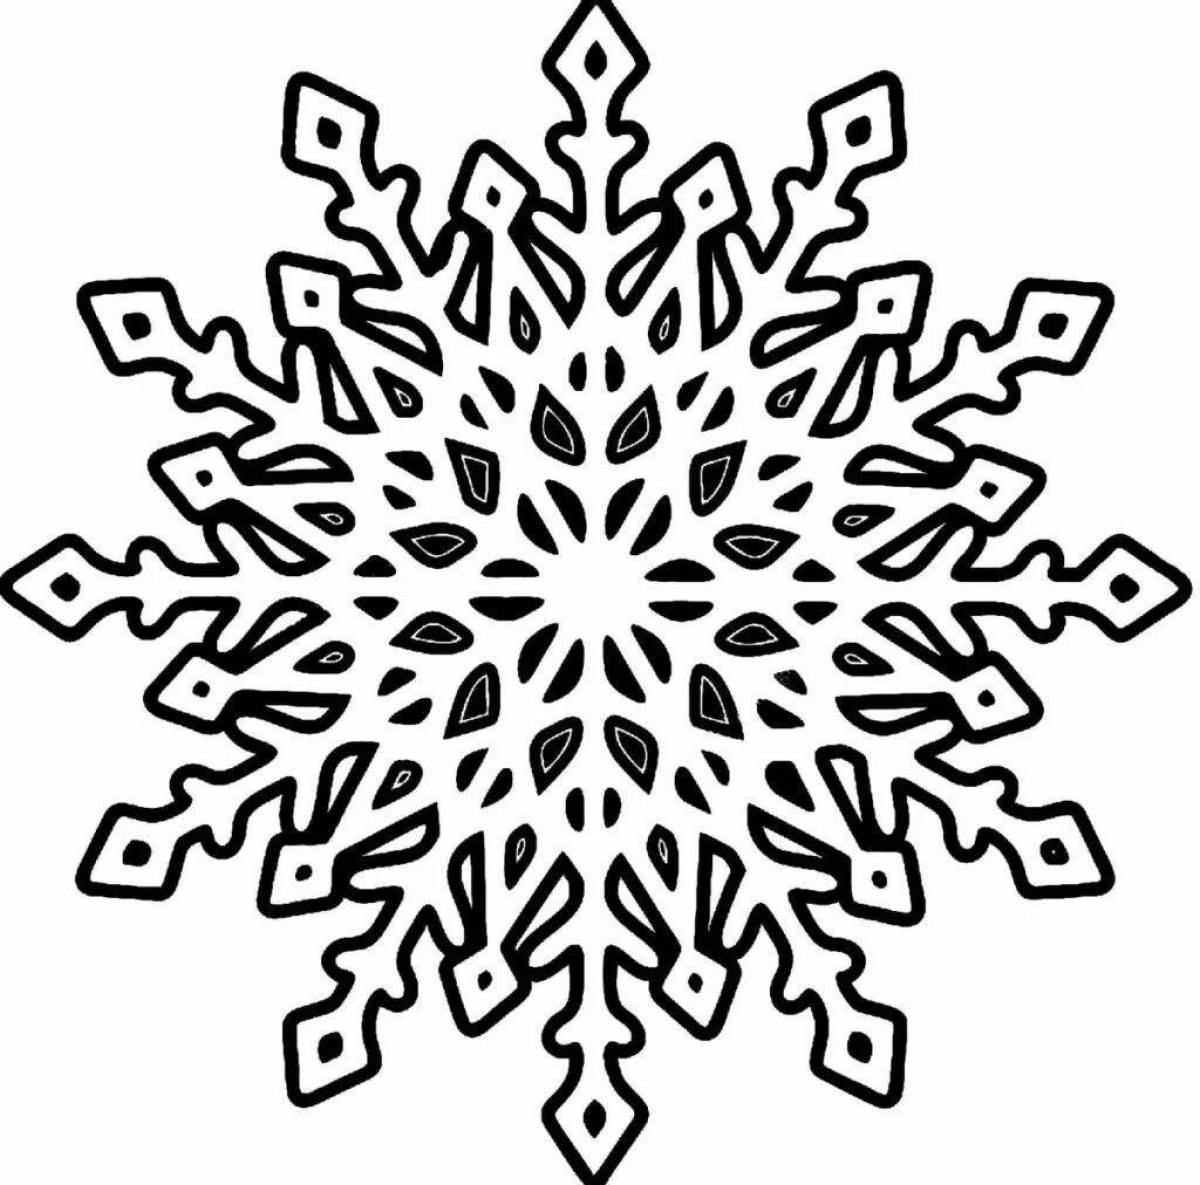 Adorable snowflake coloring book for kids 4-5 years old